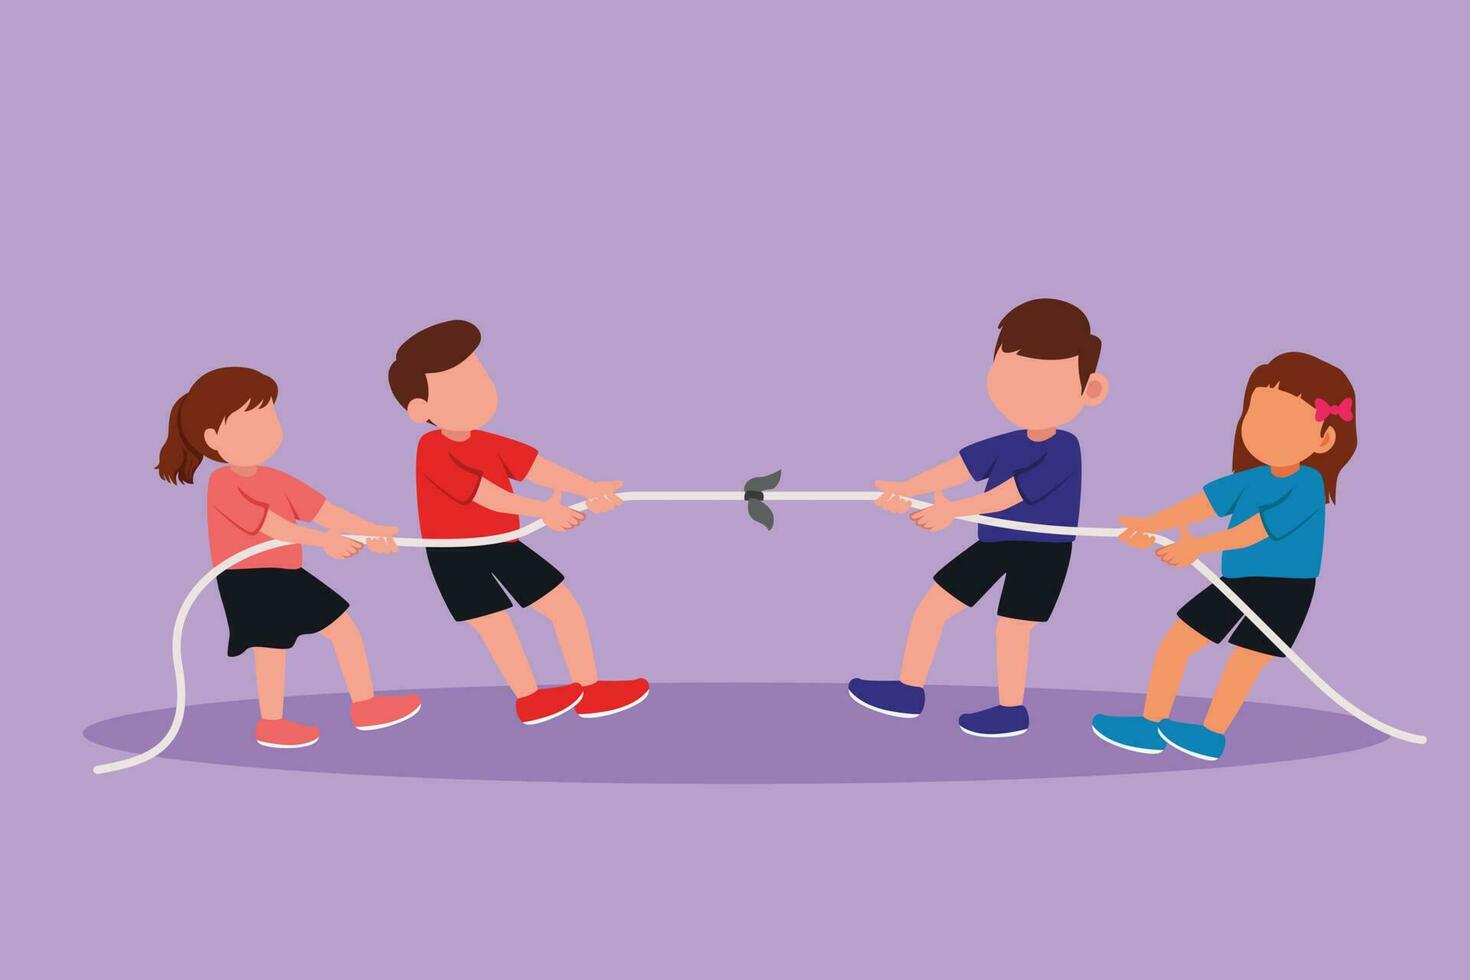 Cartoon flat style drawing group of children playing tug of war at playground. Happy kids playing tug of war at park. Girls and boys pull rope, outdoor child games. Graphic design vector illustration